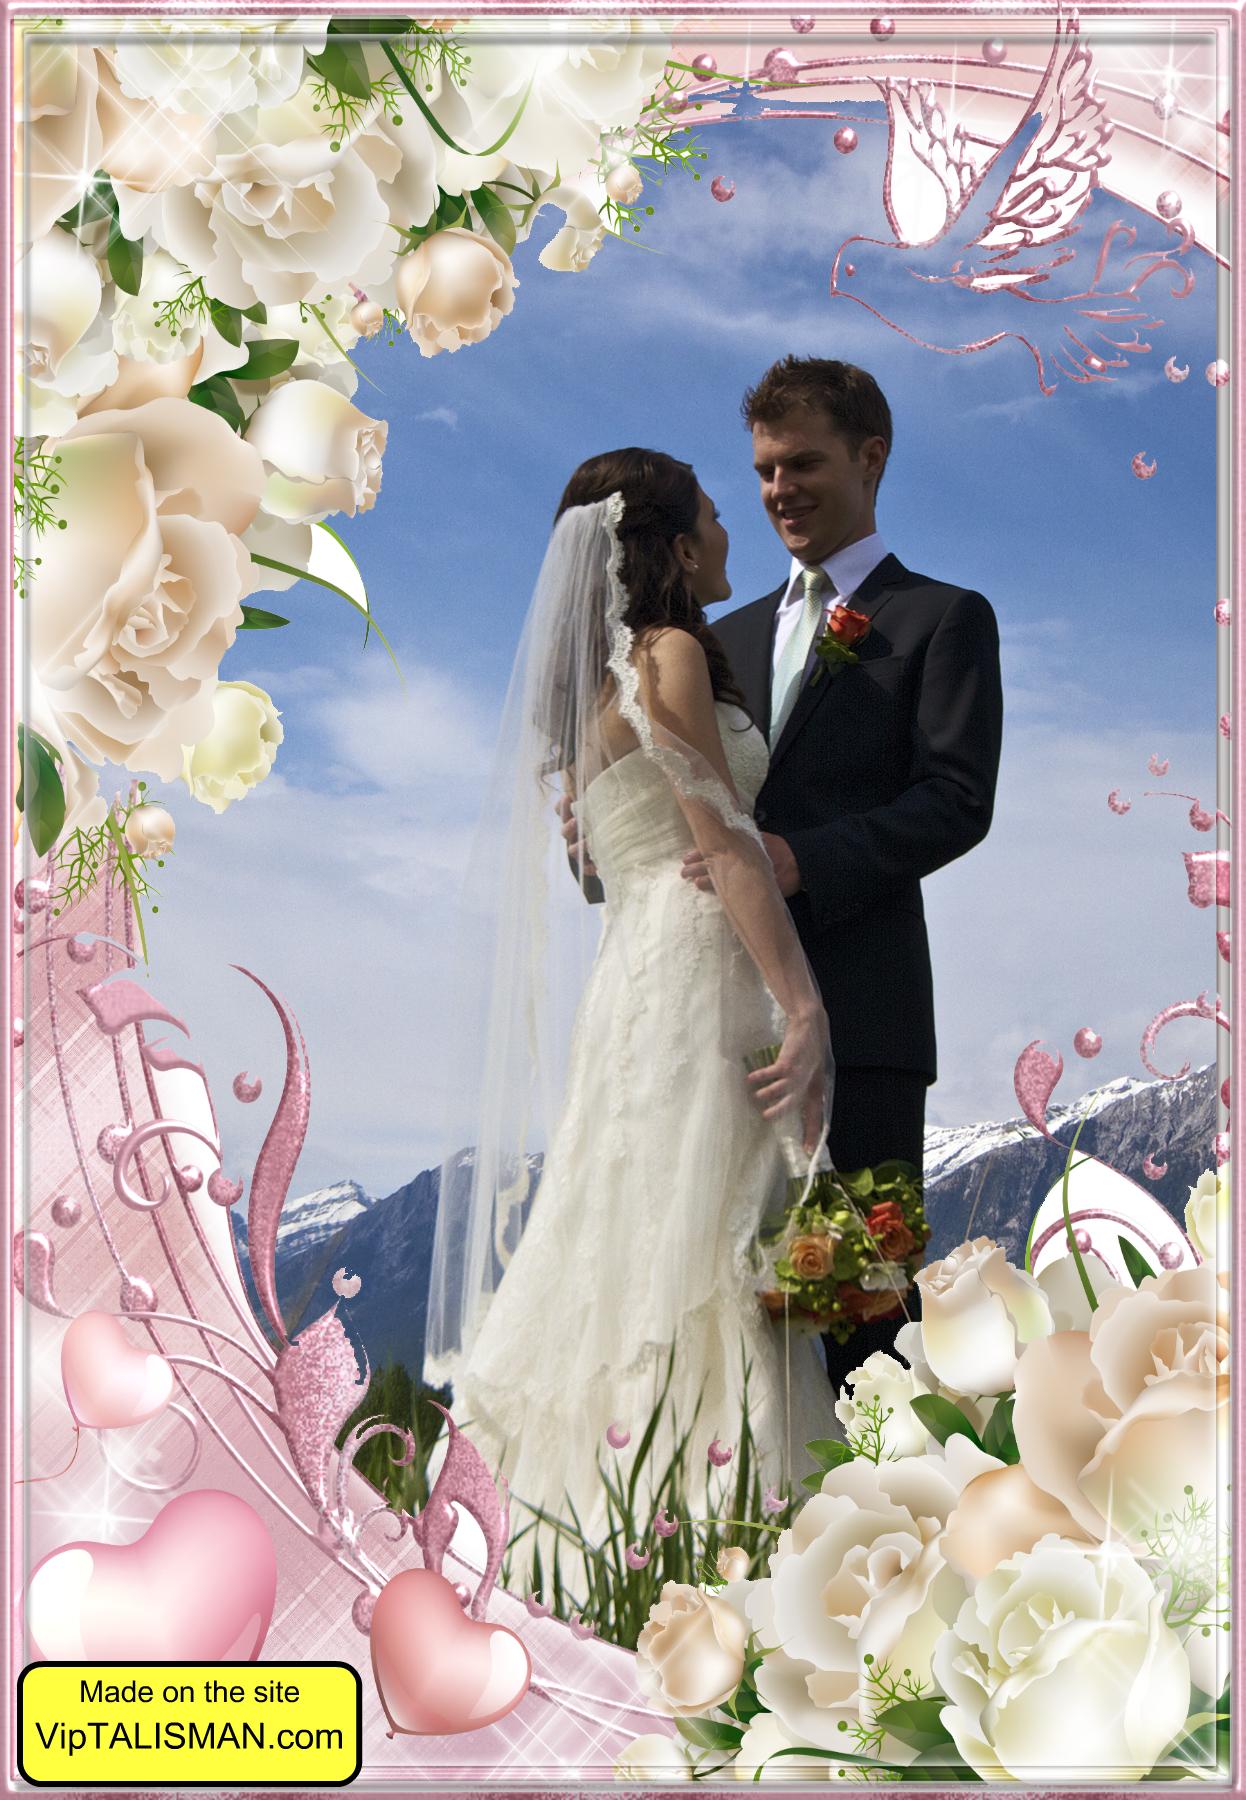 Wedding Photo Frames for Android - APK Download